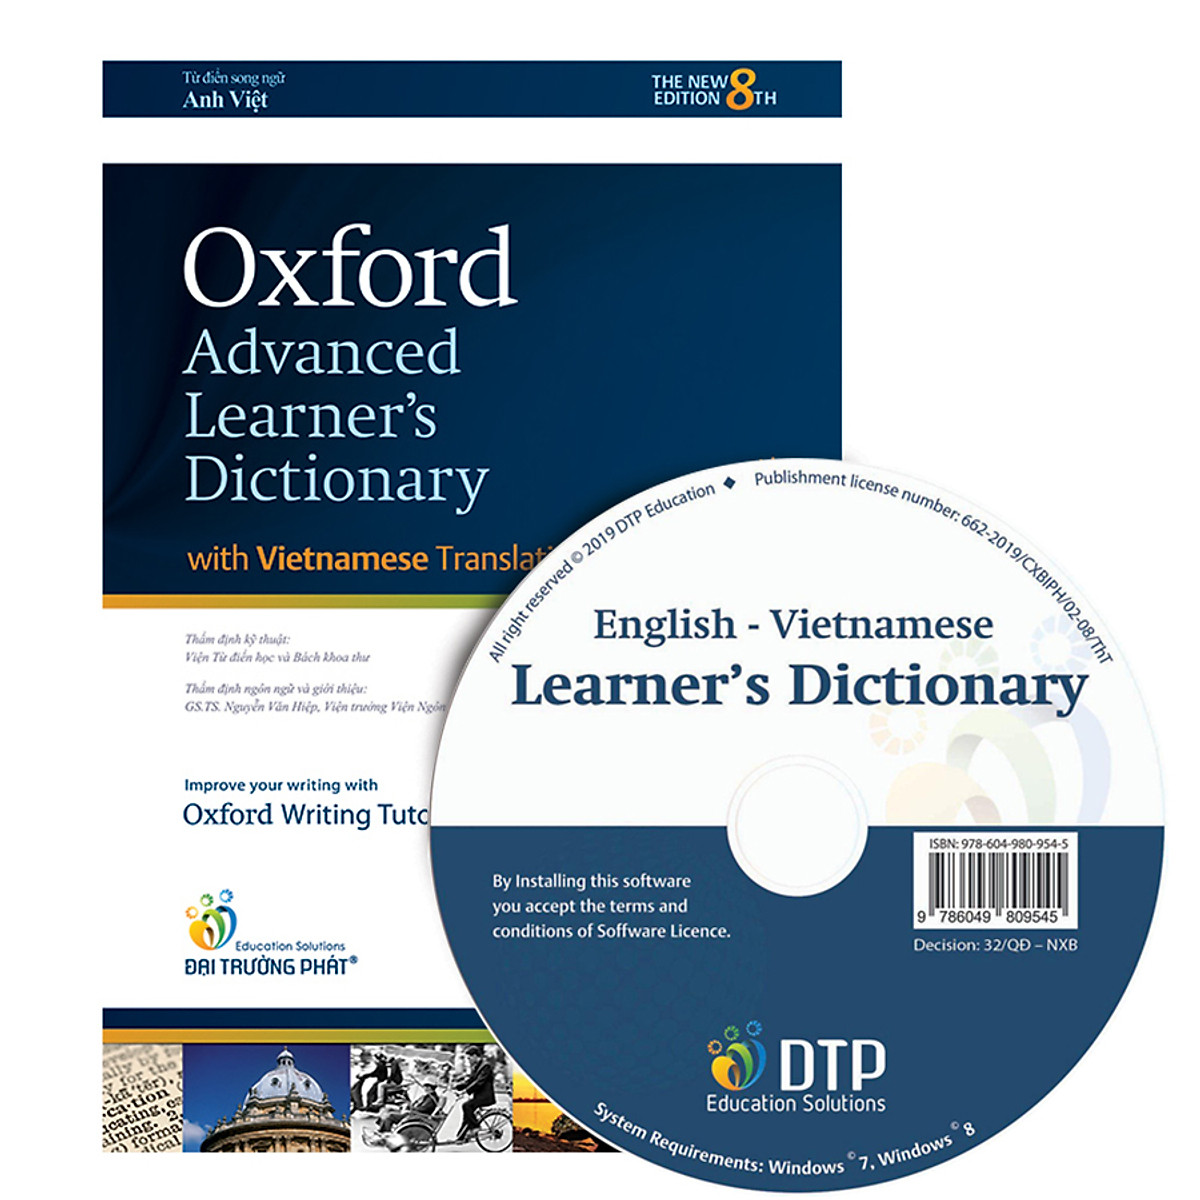 Oxford Advanced Learner's Dictionary 8th Edition (With Vietnamese Translation) and CD - ROM (Hardback)